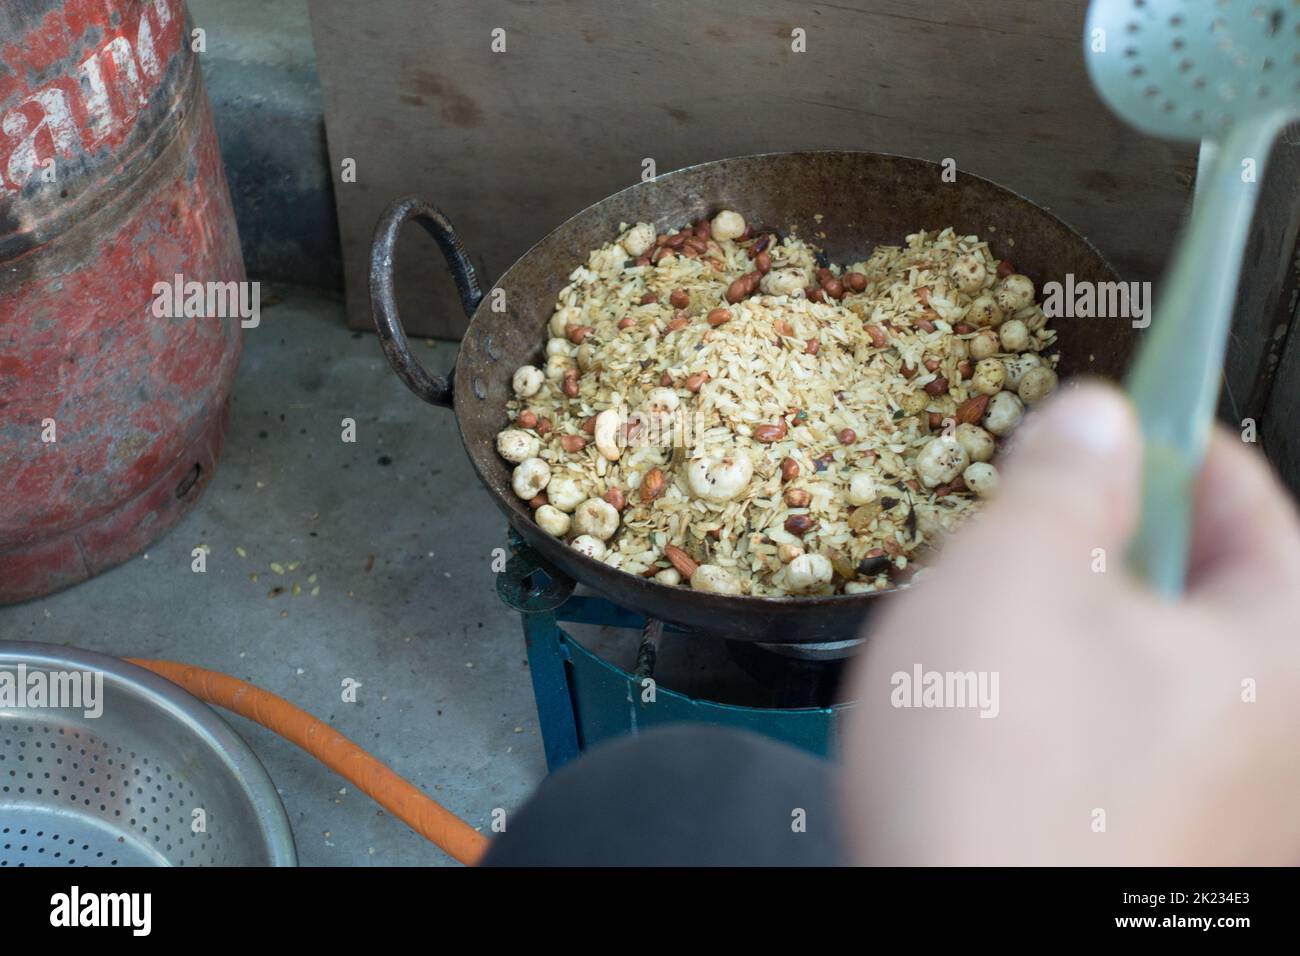 Preparing Homemade granola with oats, buckwheat, nuts and seeds in a big cast iron cauldron or kadai on a traditional stove. Uttarakhand India Stock Photo